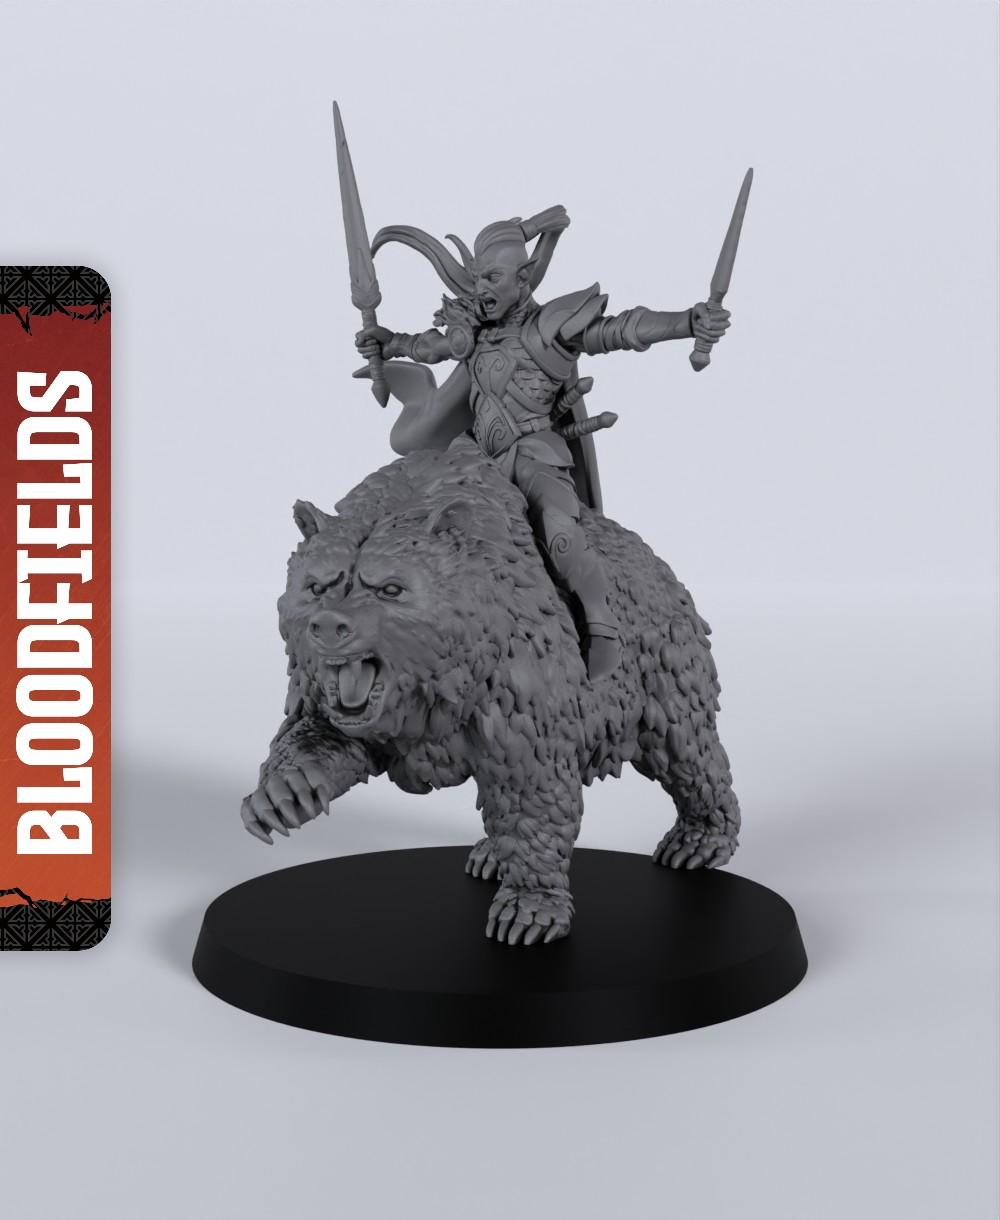 Urasarin Ironleaf - With Free Dragon Warhammer - 5e DnD Inspired for RPG and Wargamers 3d model